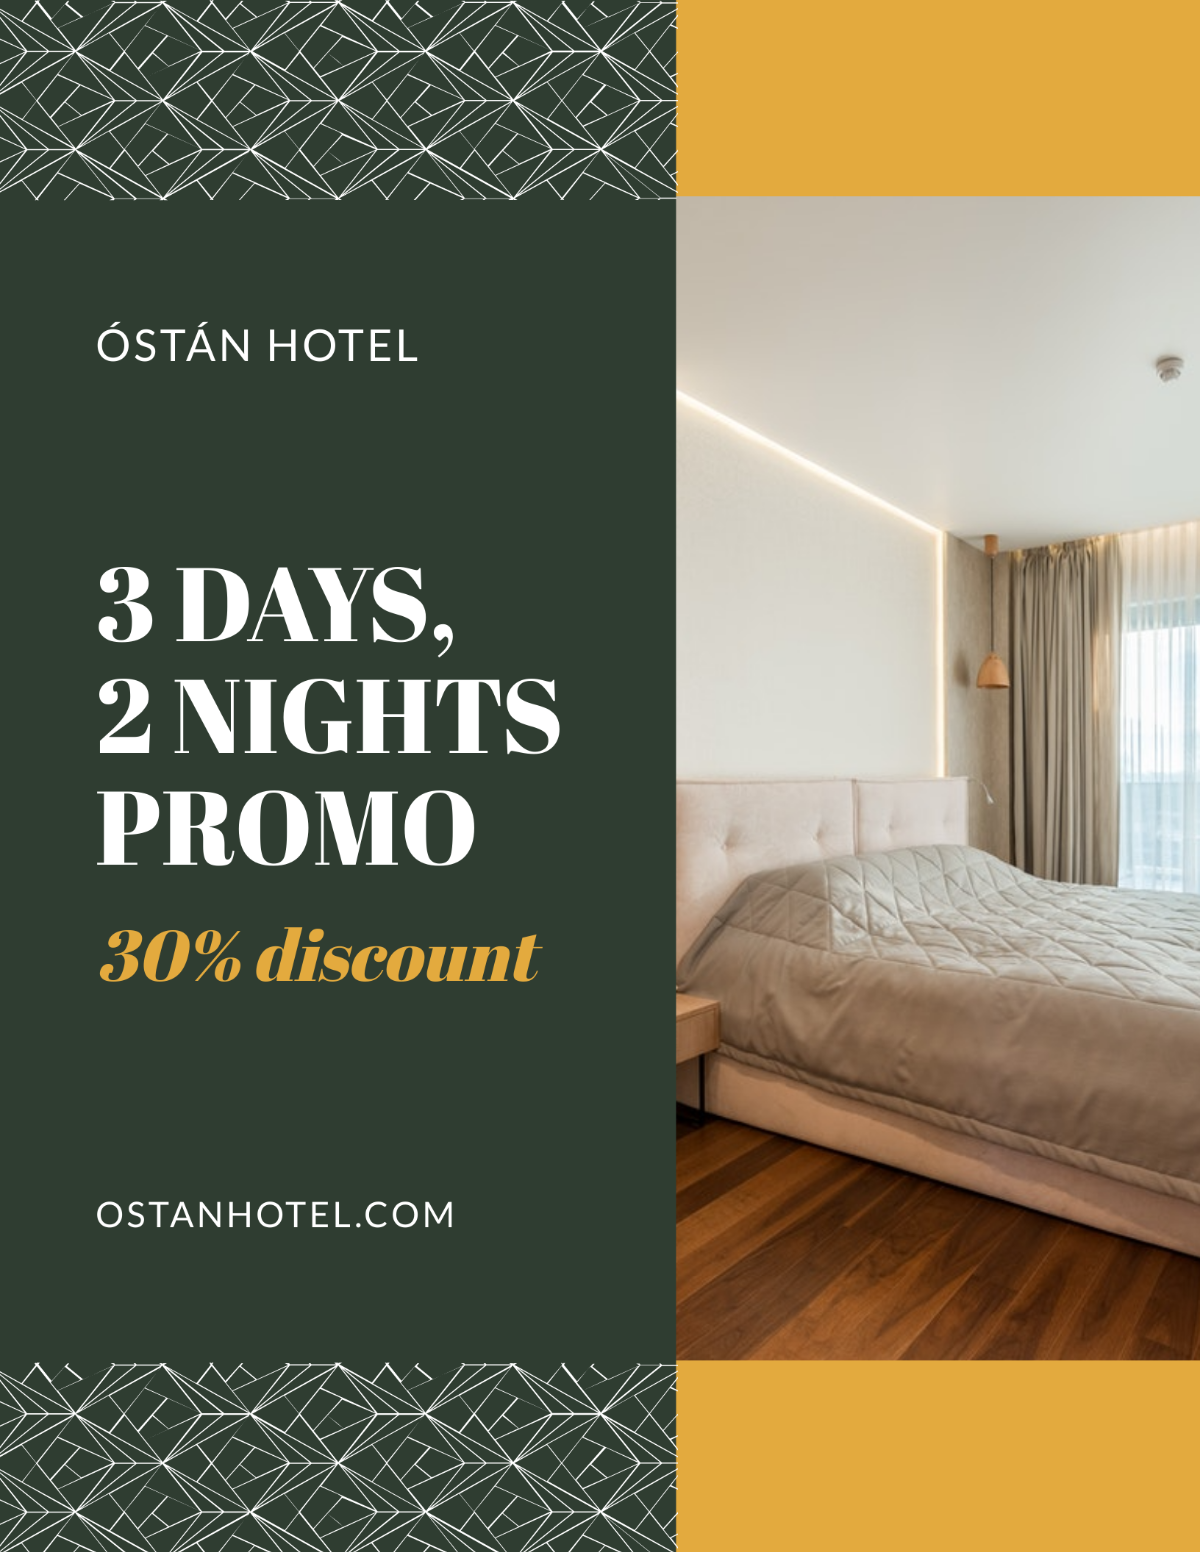 Hotel Promotion Flyer Template